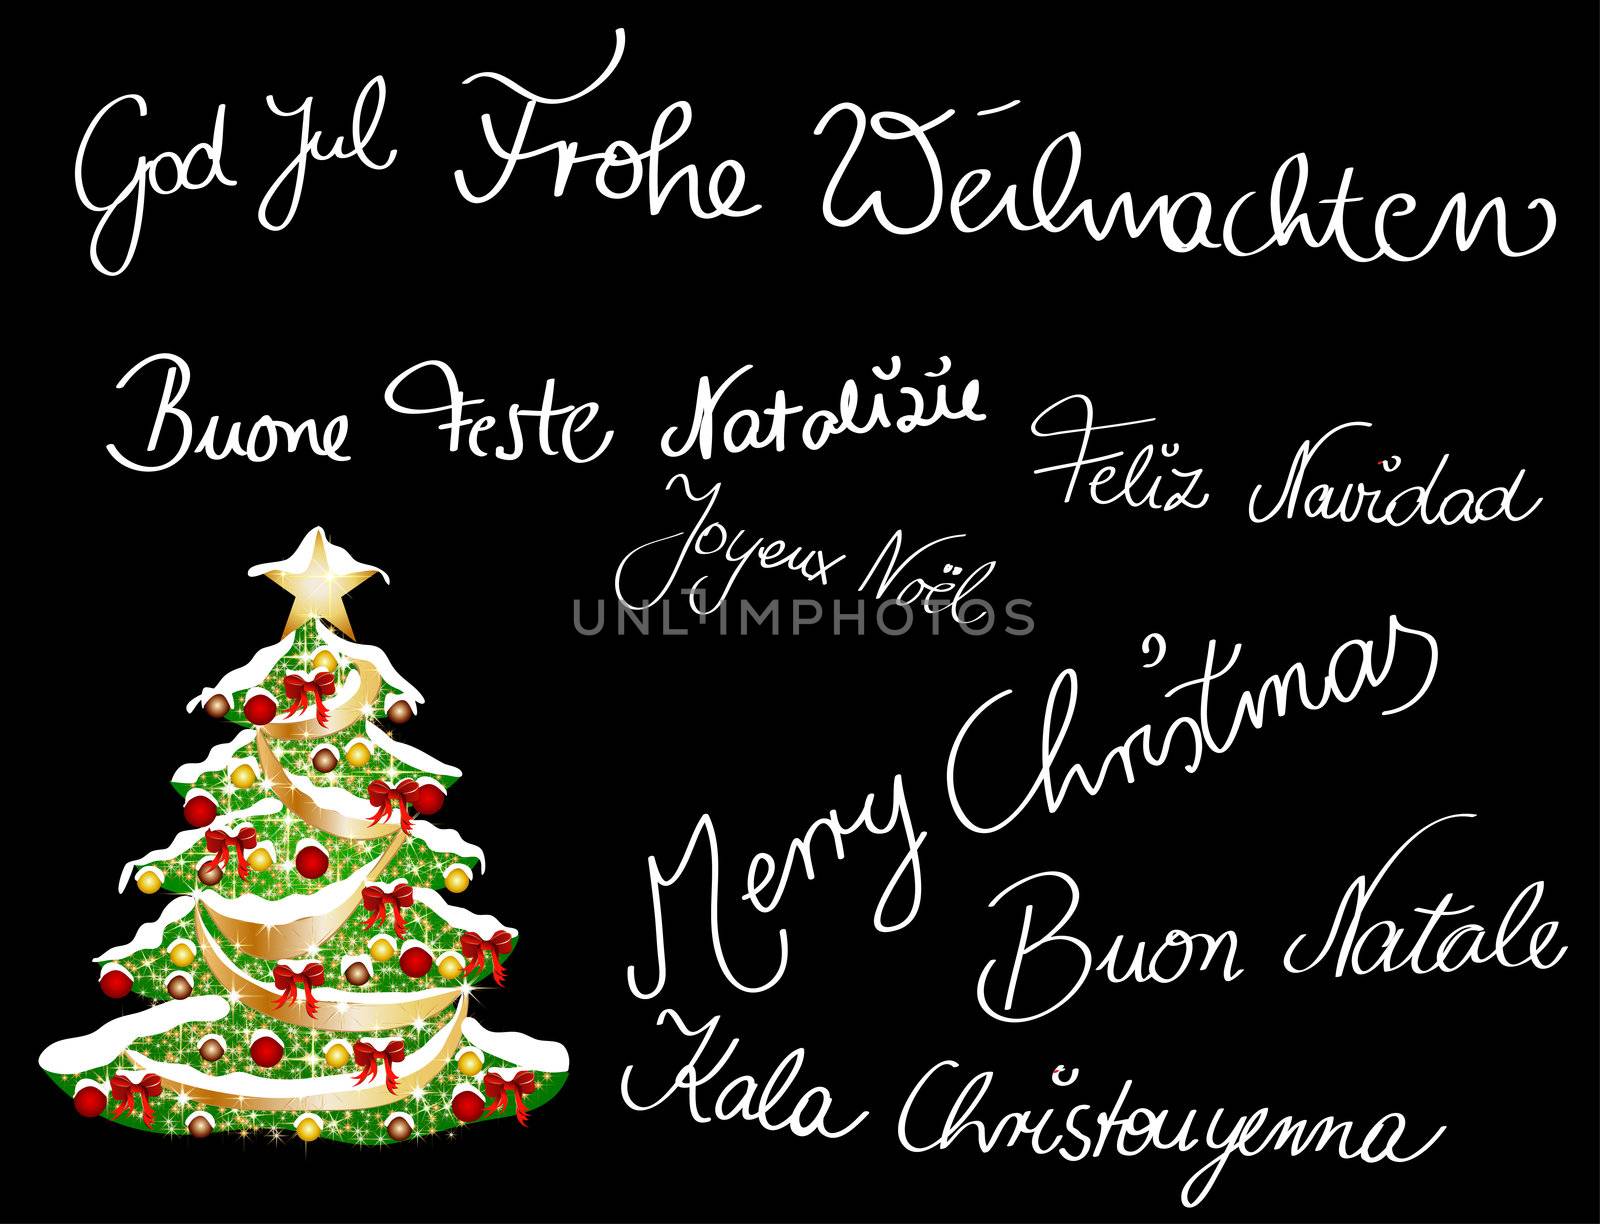 Multilingual Christmascard by peromarketing